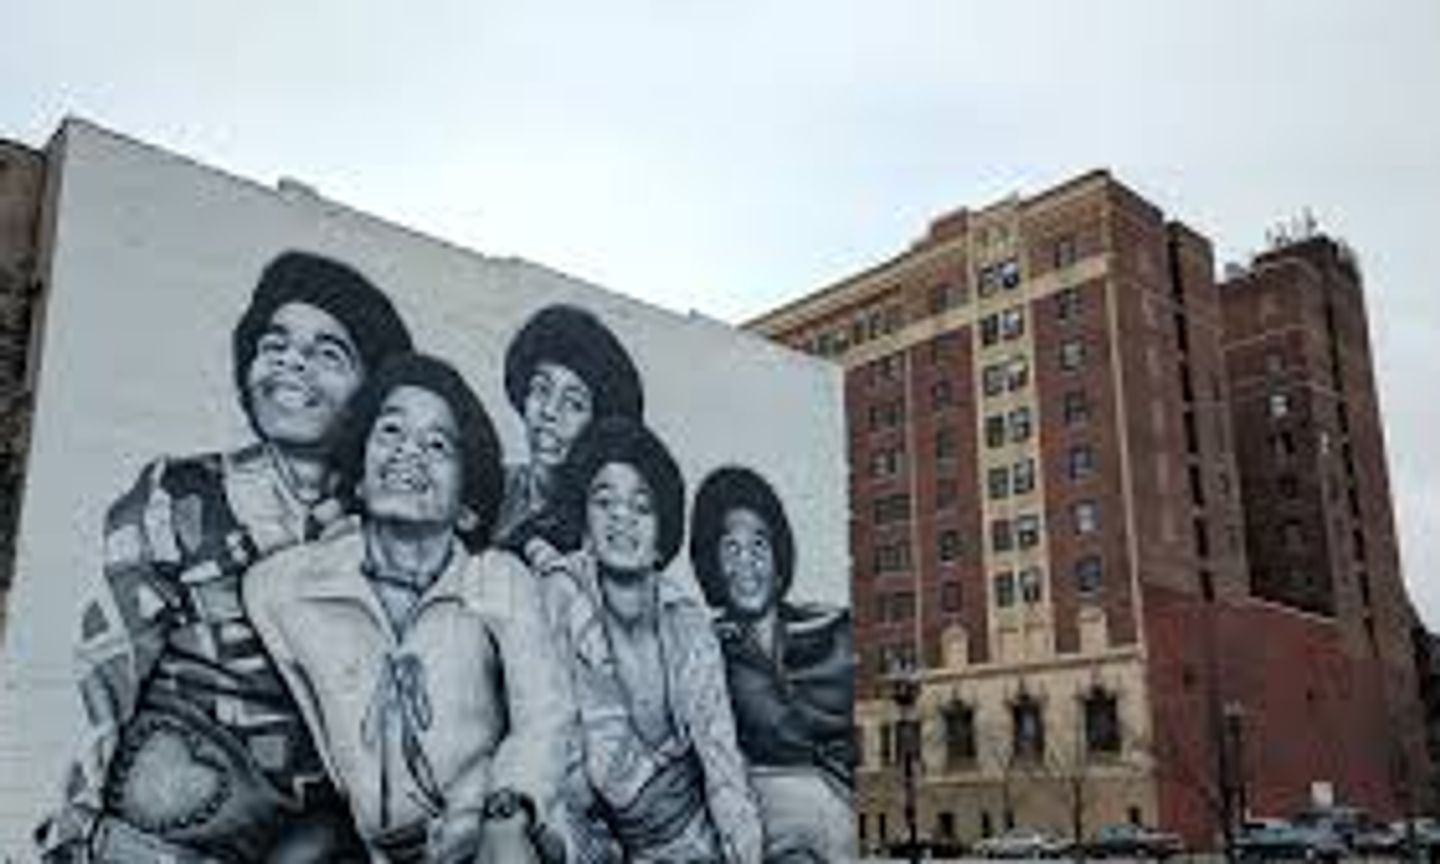 Mural in Gary Indiana (Photo Credit: Curbed Chicago)